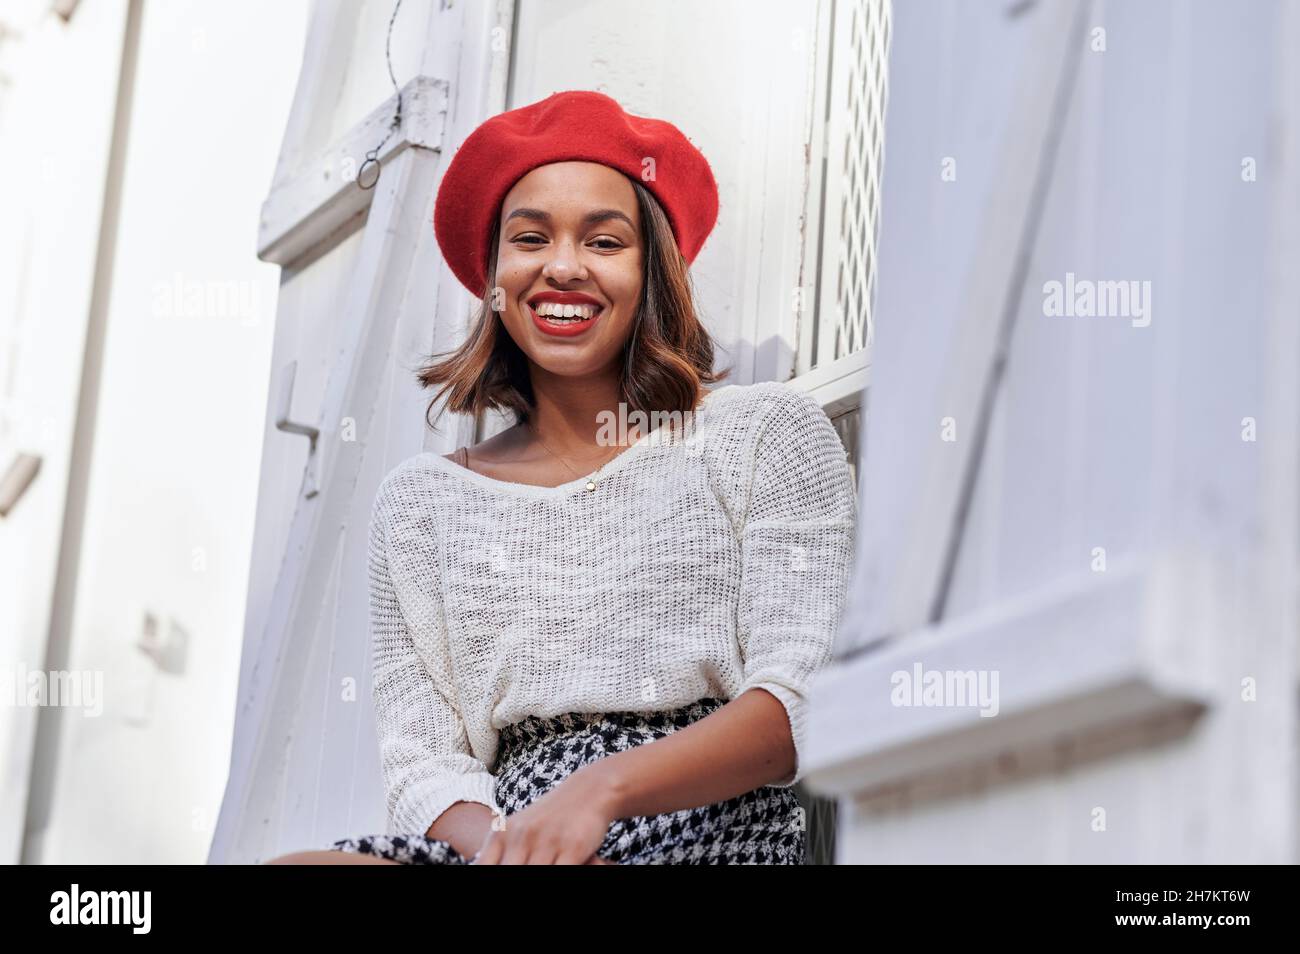 Smiling woman with beret sitting at window Stock Photo